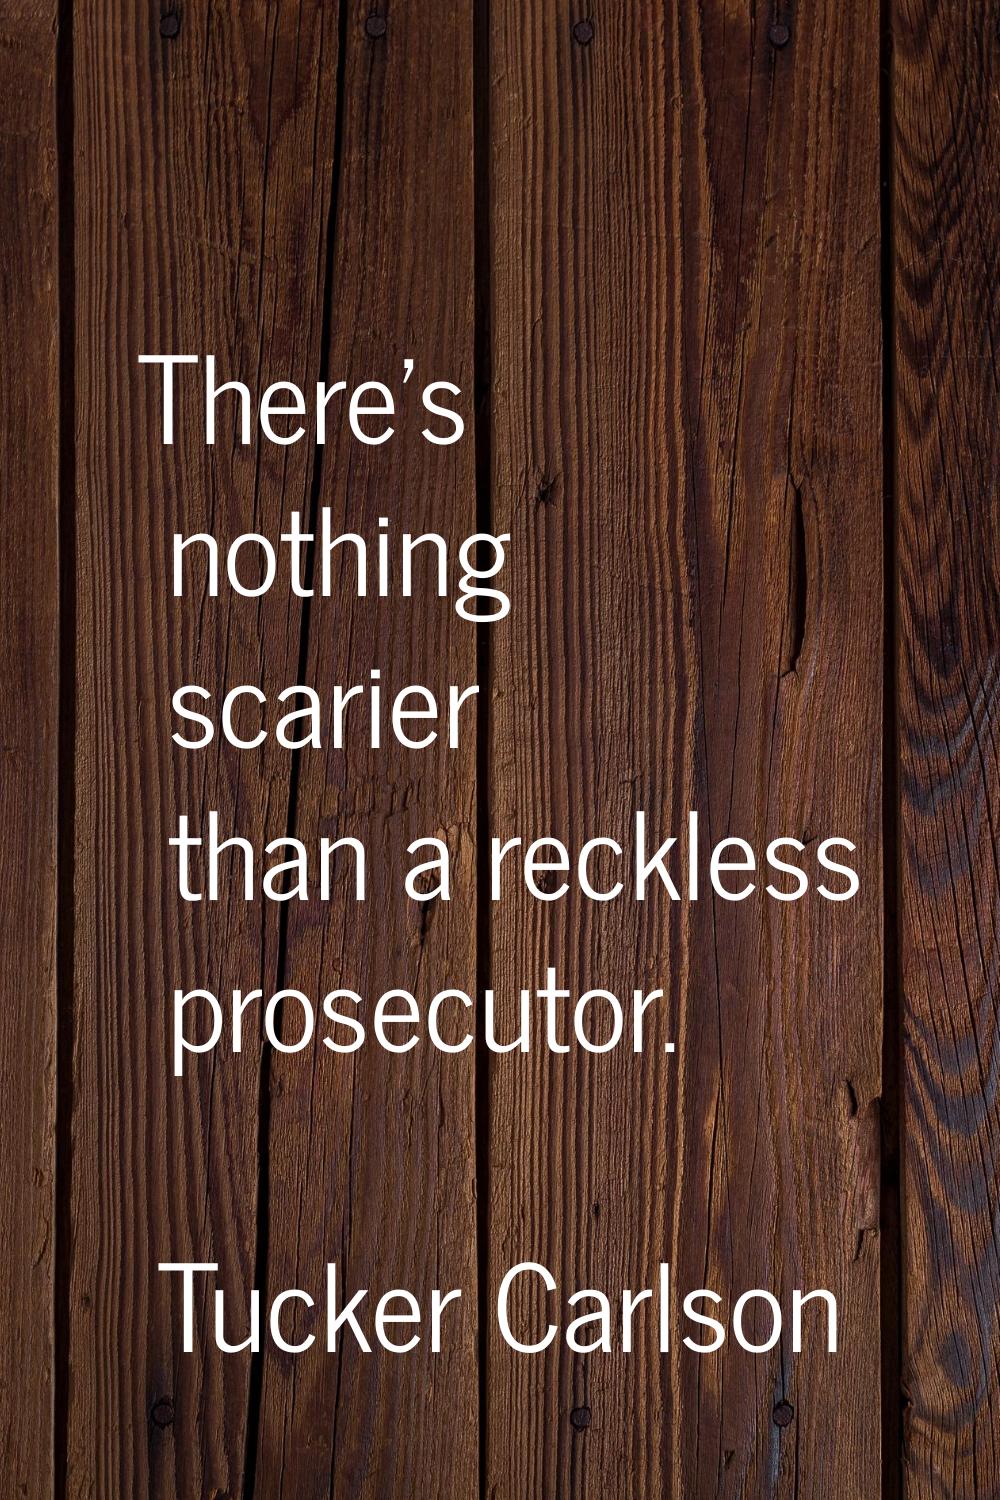 There's nothing scarier than a reckless prosecutor.